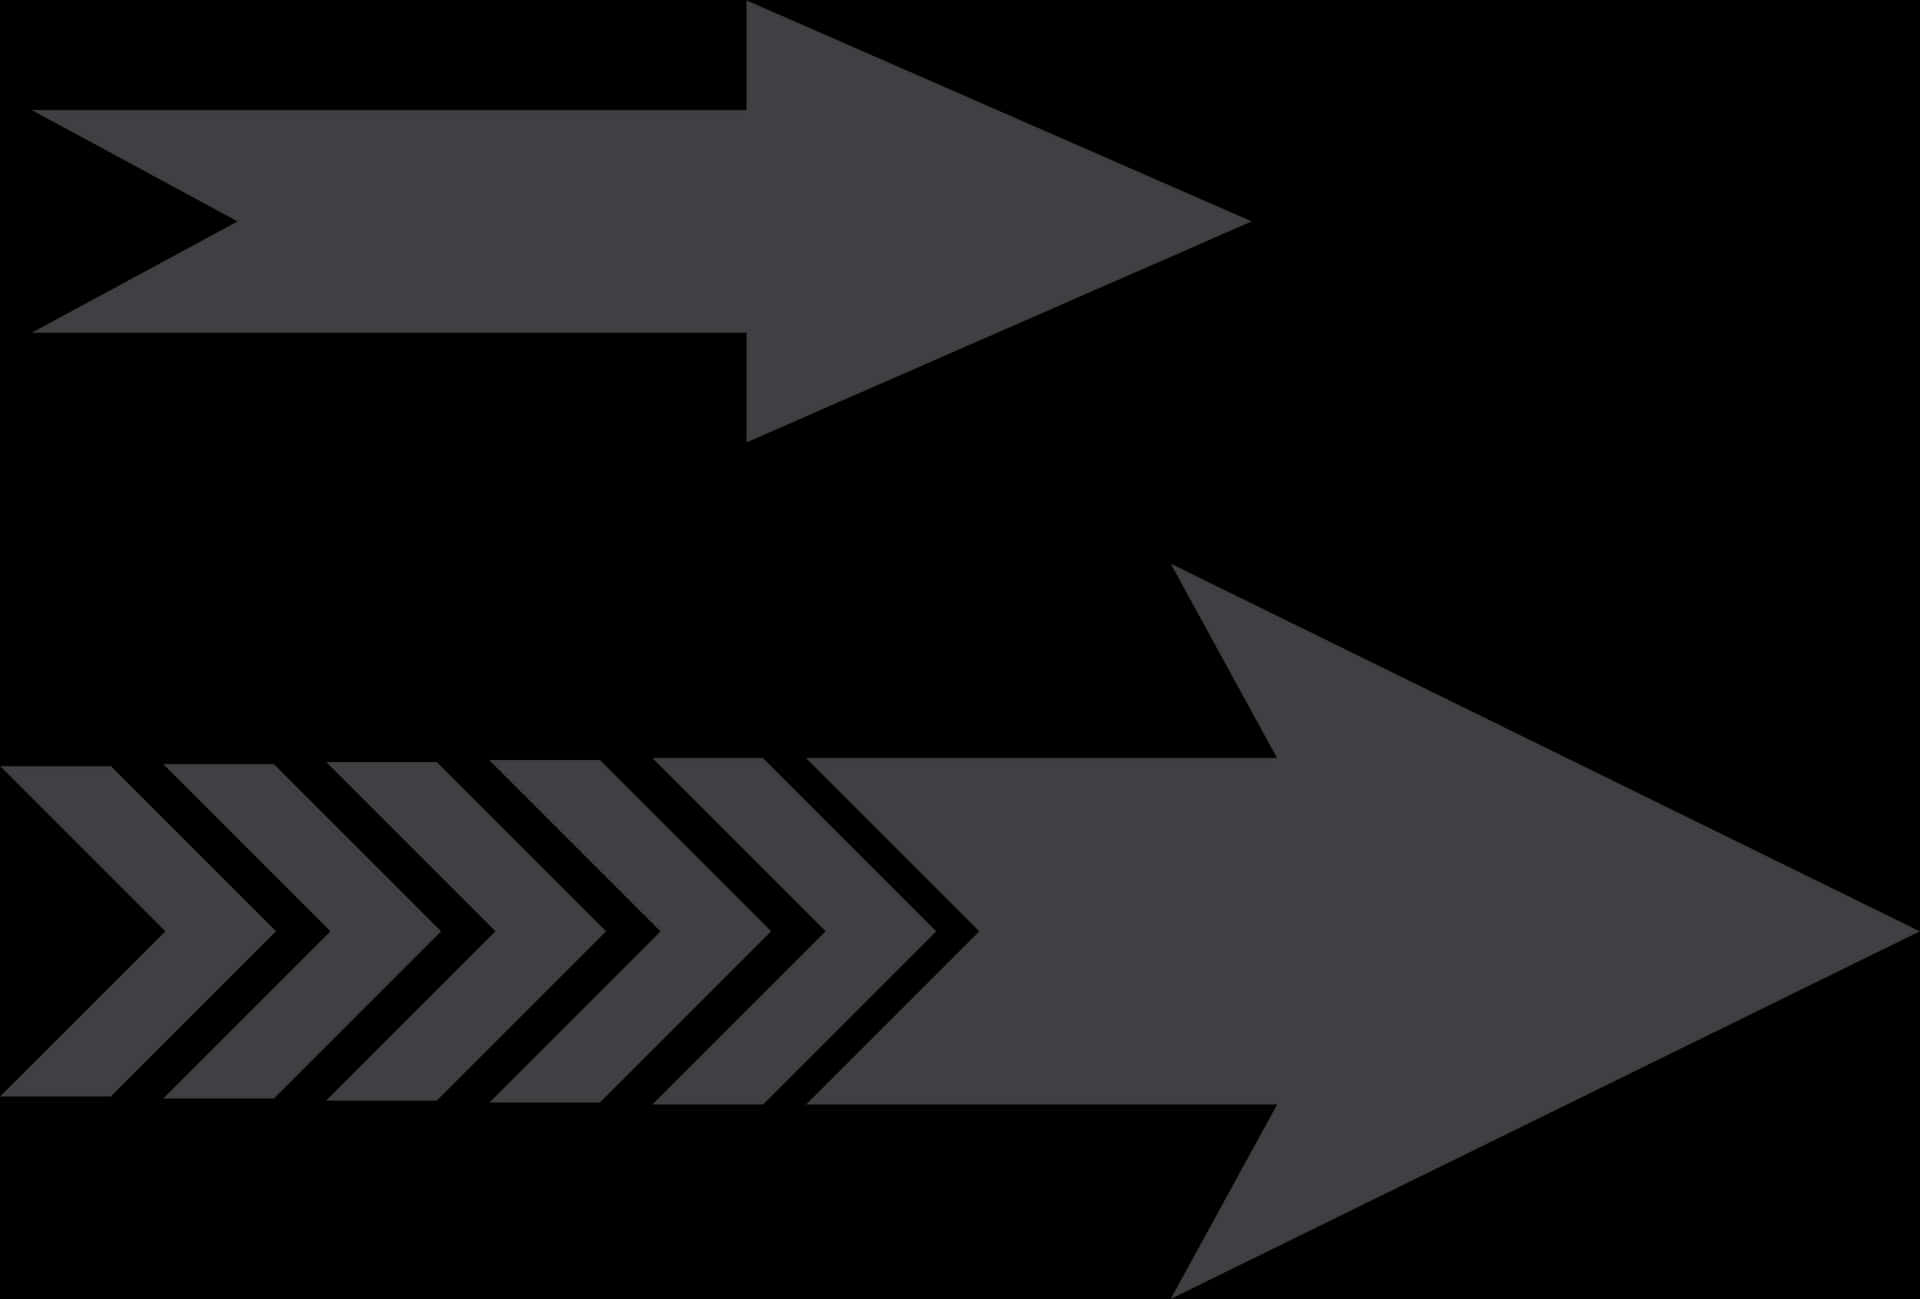 Abstract Arrow Design PNG